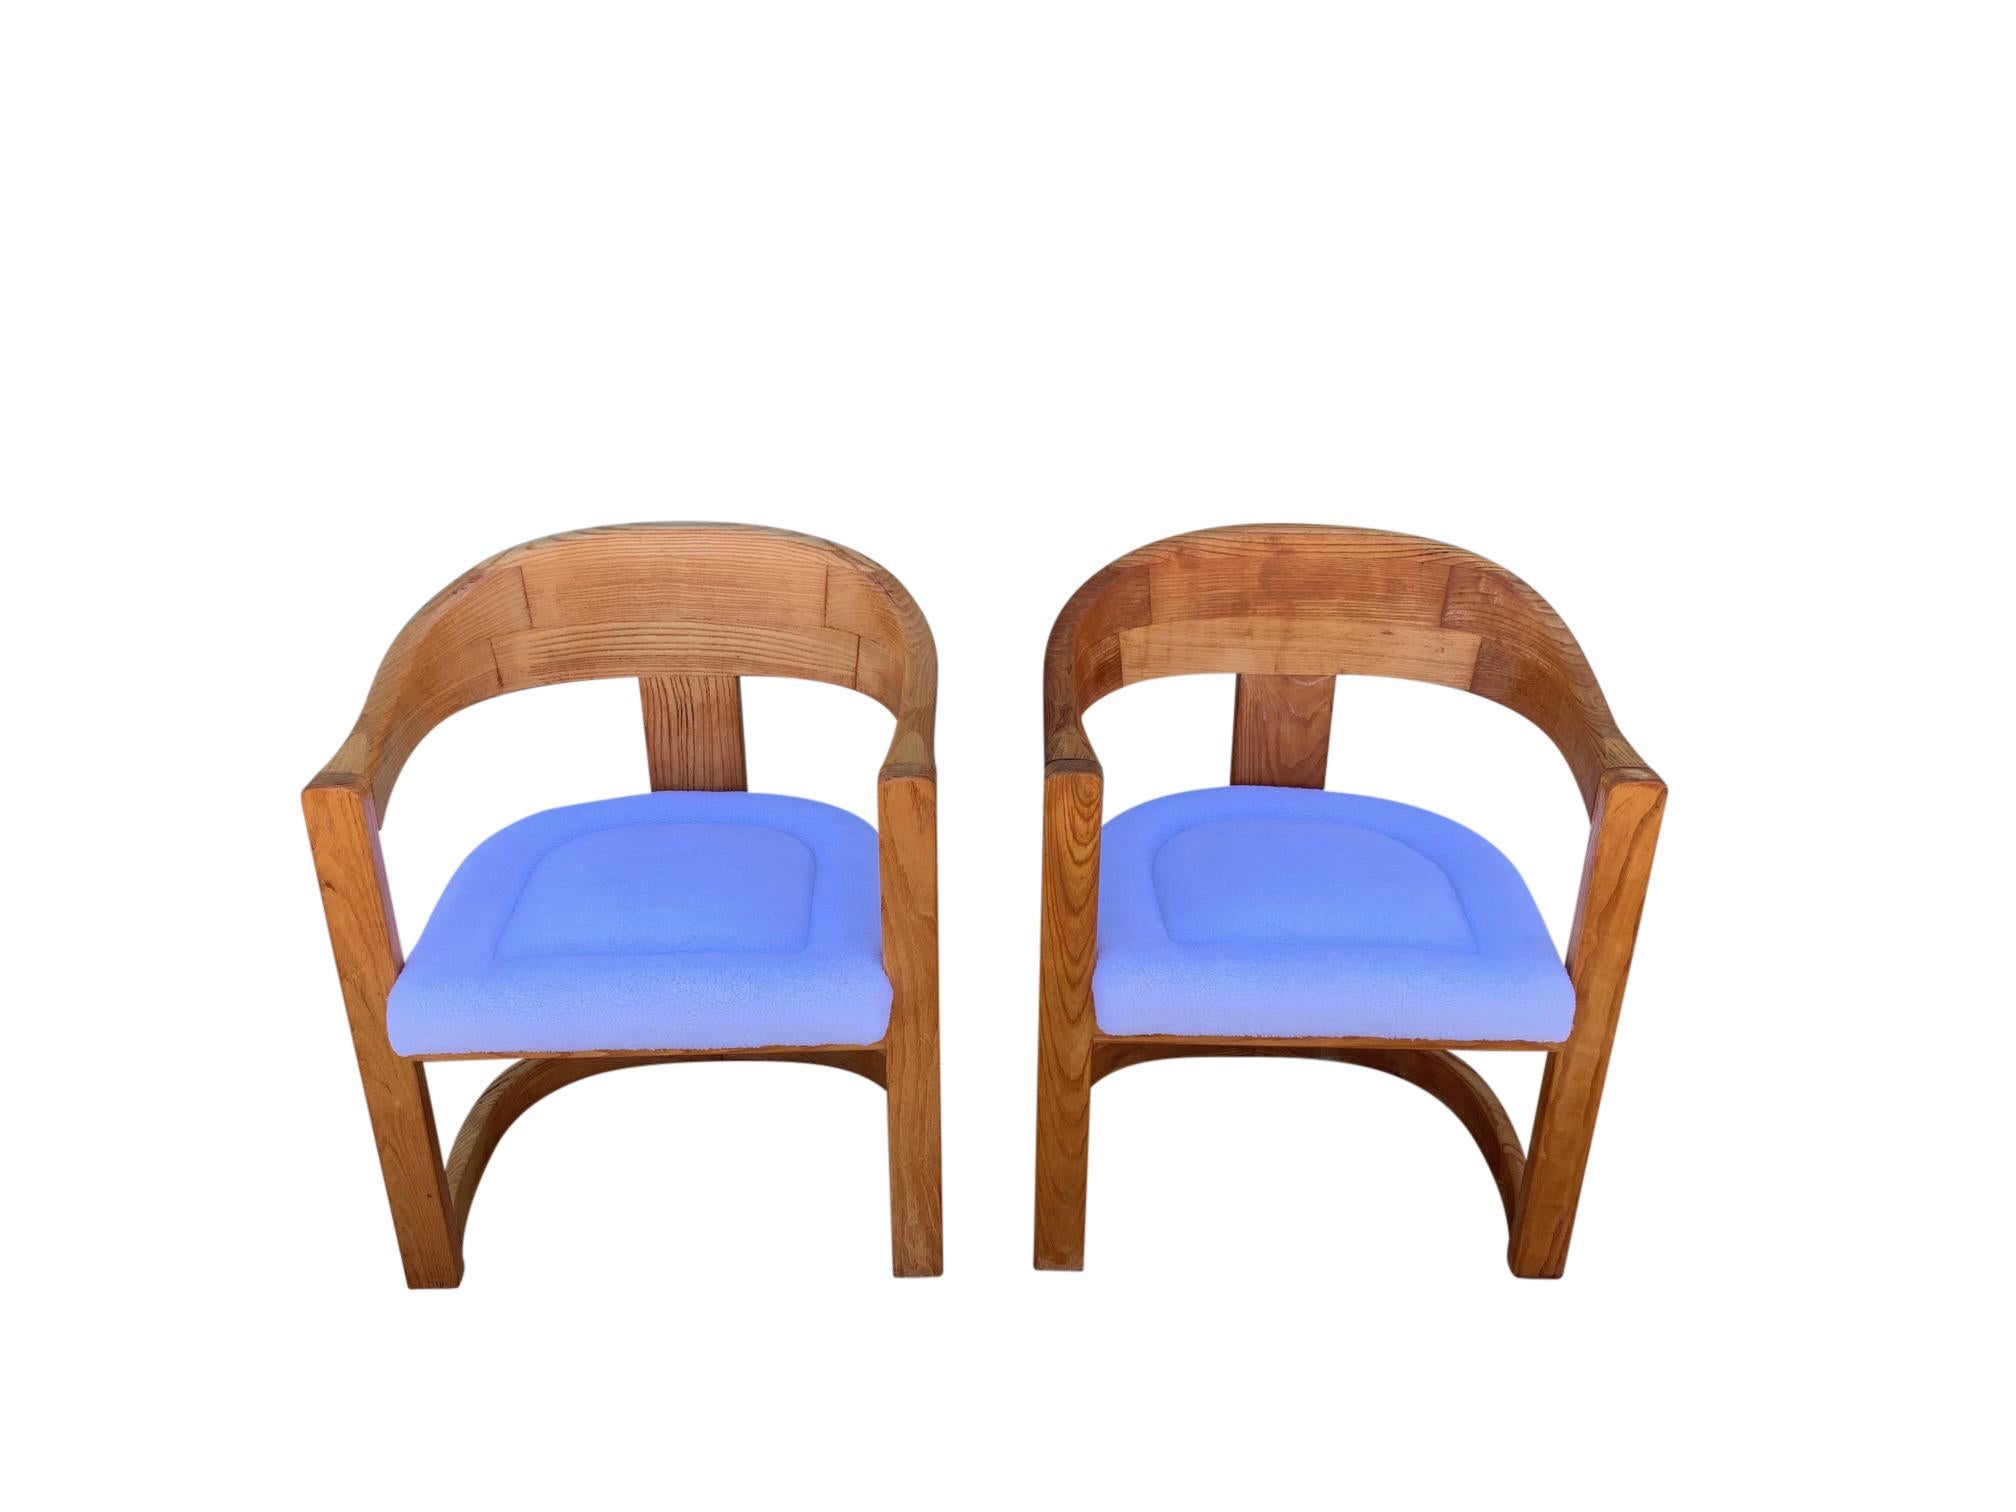 Pair of Oak Onassis Chairs by Karl Springer Mid-Century Modern In Good Condition For Sale In West Palm Beach, FL